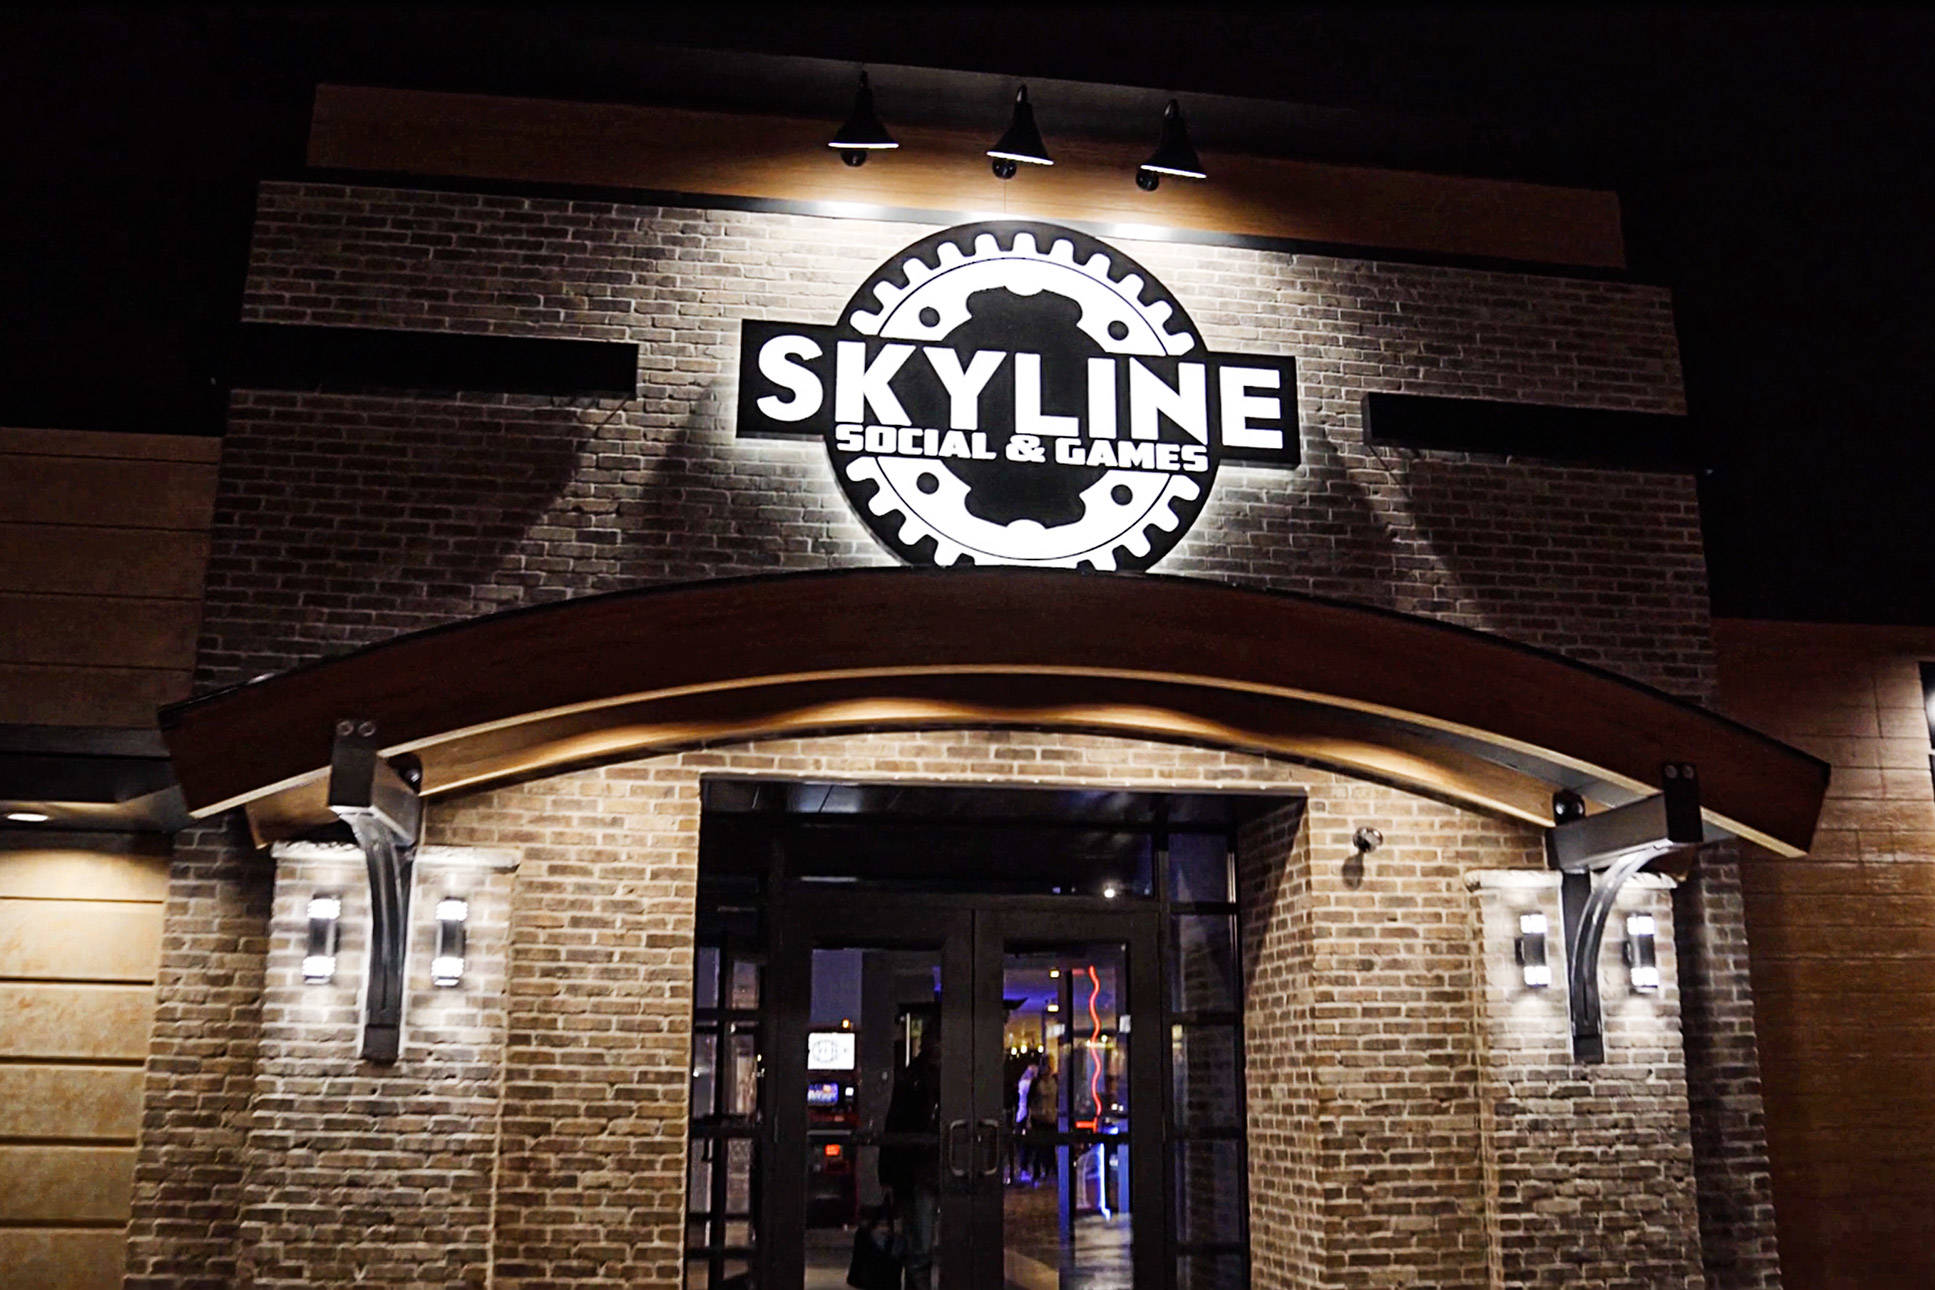 Skyline Social and Games